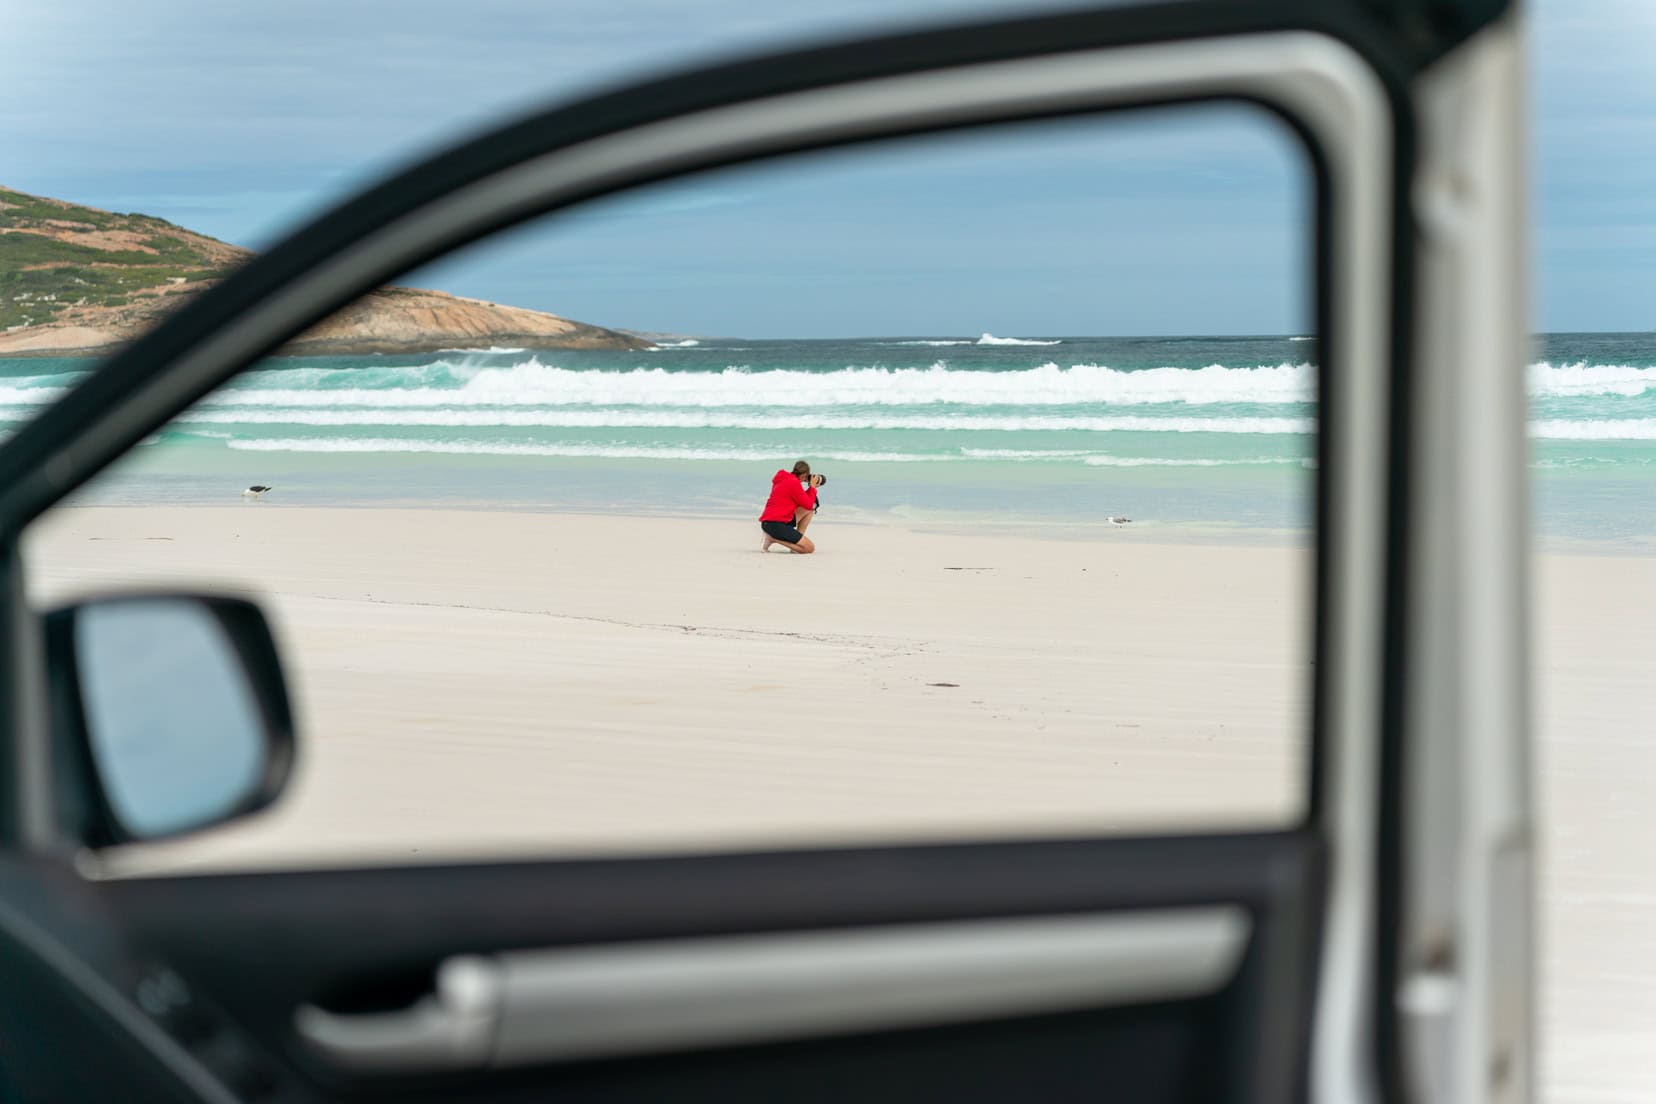 Beach-car framing - Shelley kneeling on the sand by the ocean and can be seen through the opened window of the car door 